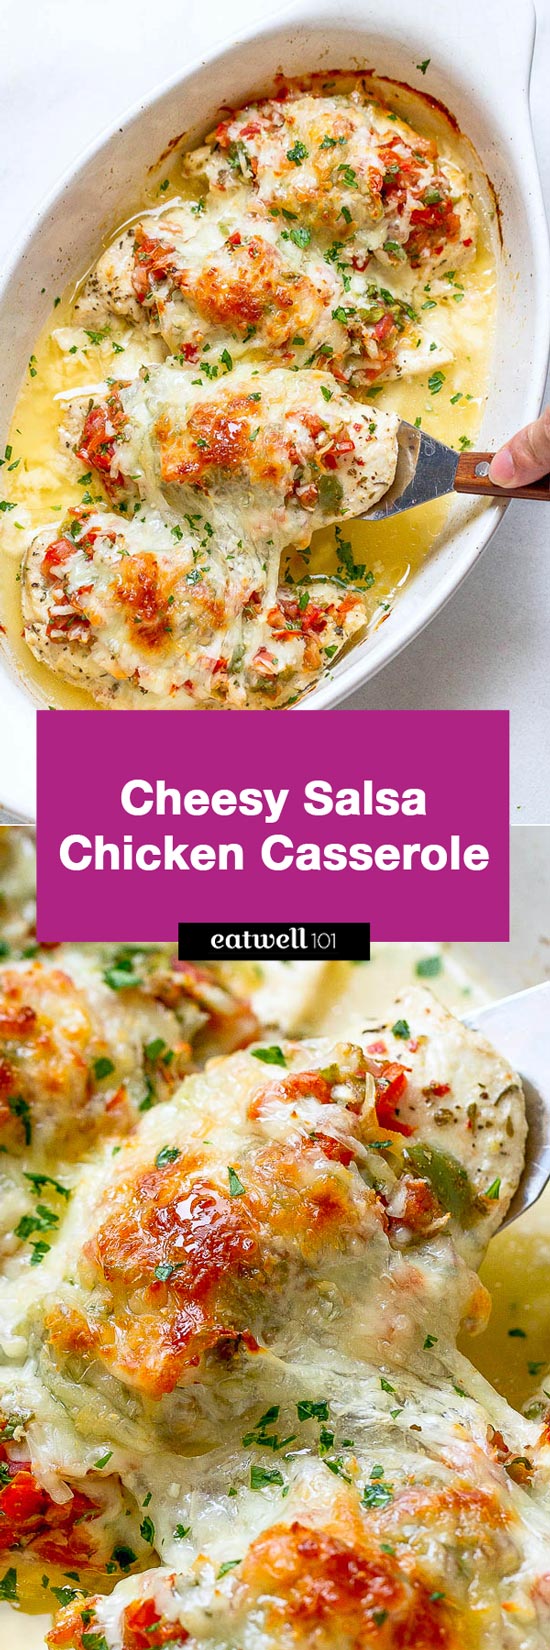 Cheesy Salsa Chicken Casserole - #chicken #casserole #recipe #eatwell101 - An incredibly delicious meal loaded with fresh flavors. 